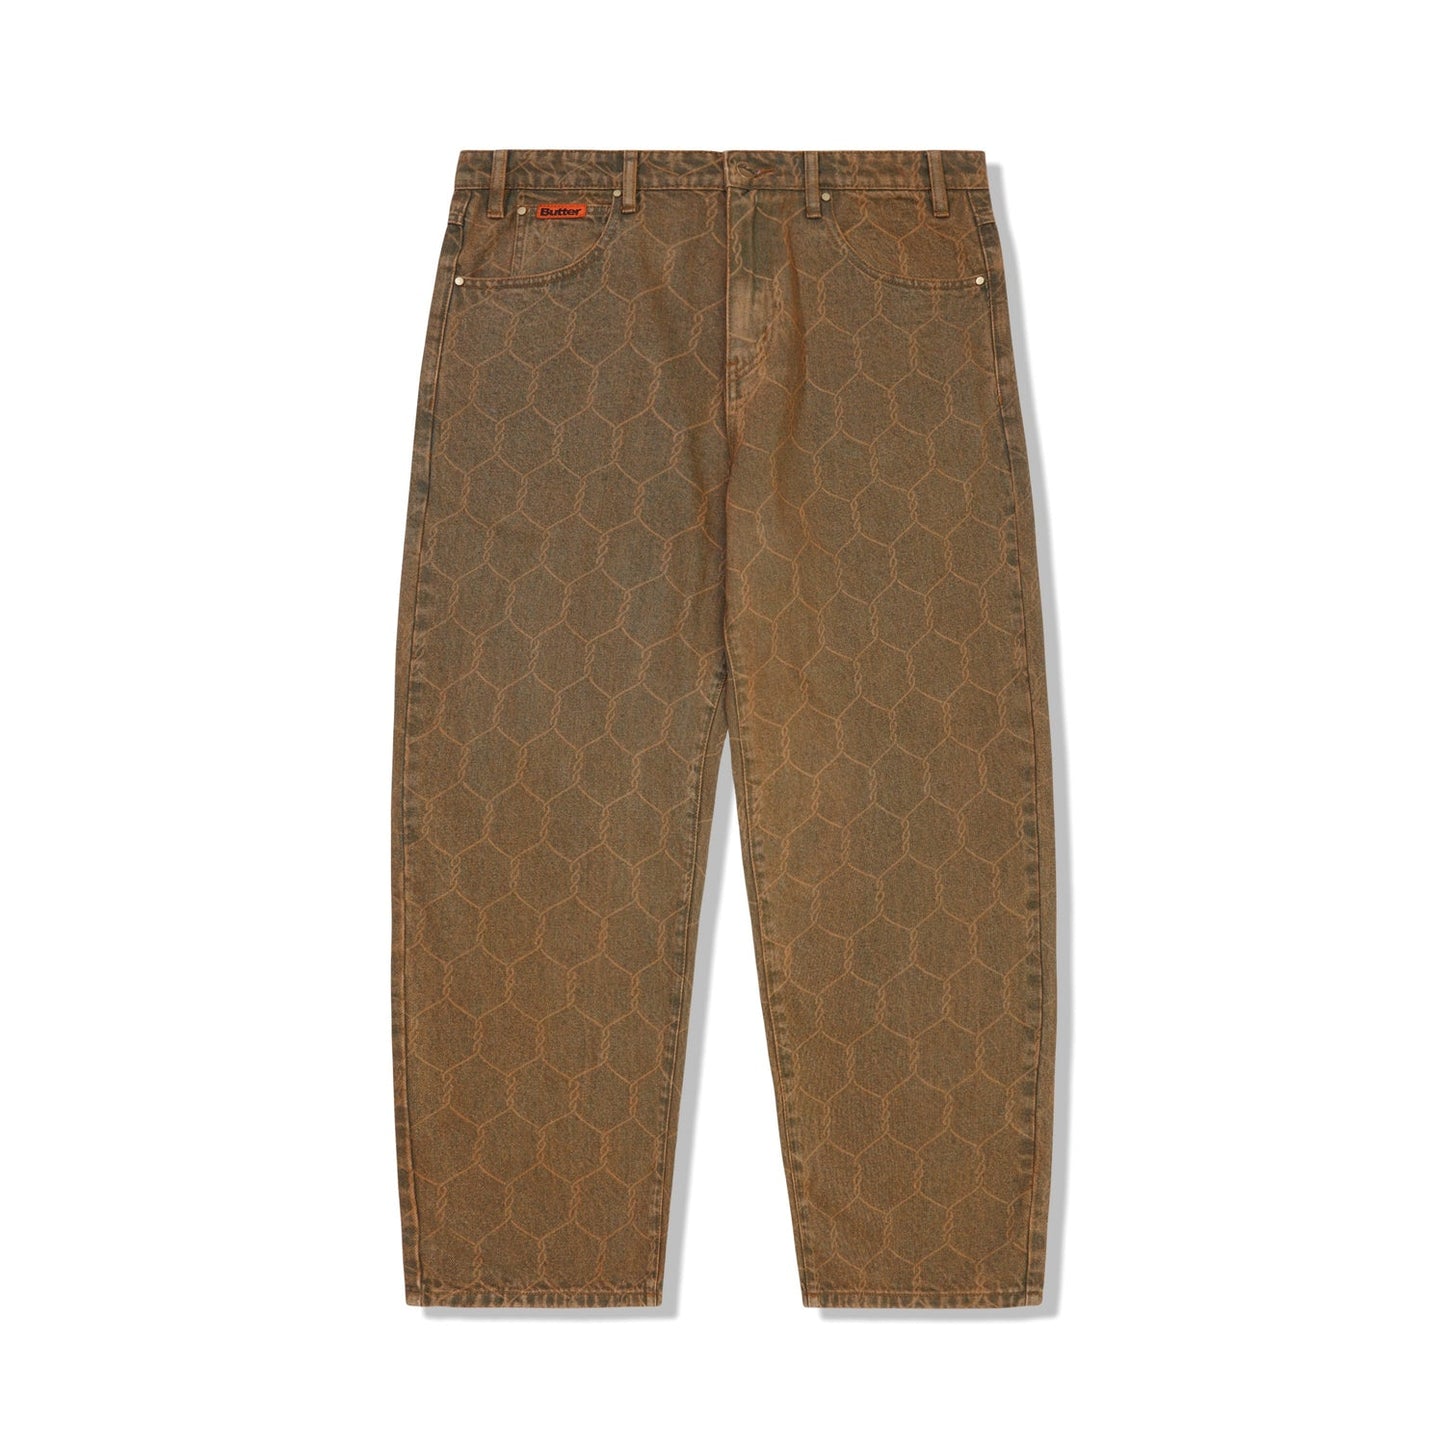 Chain Link Denim Jeans - Washed Brown